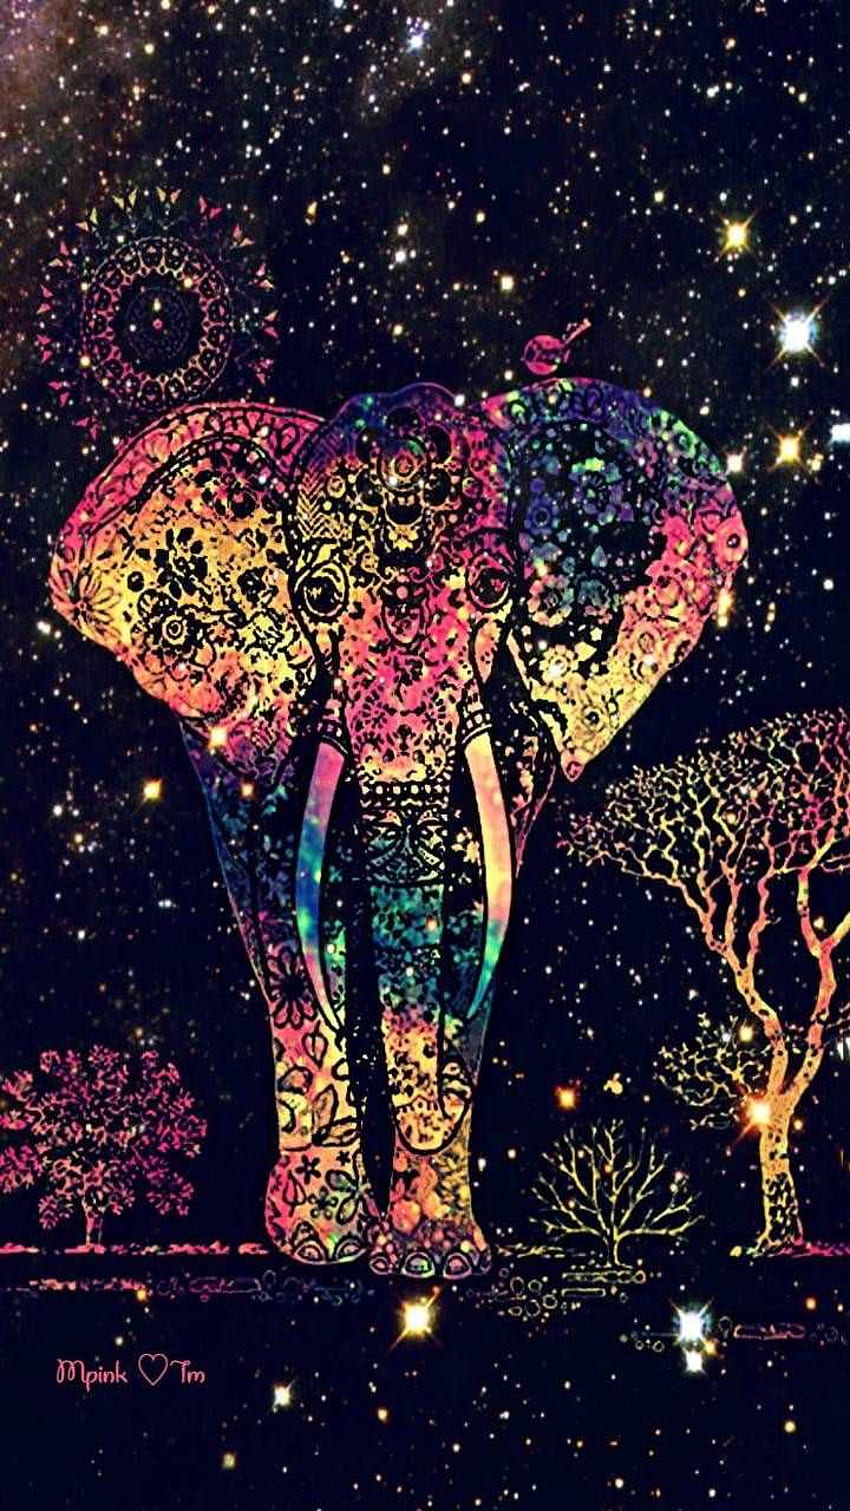 Elephant iPhone Wallpapers  Wallpaper Cave